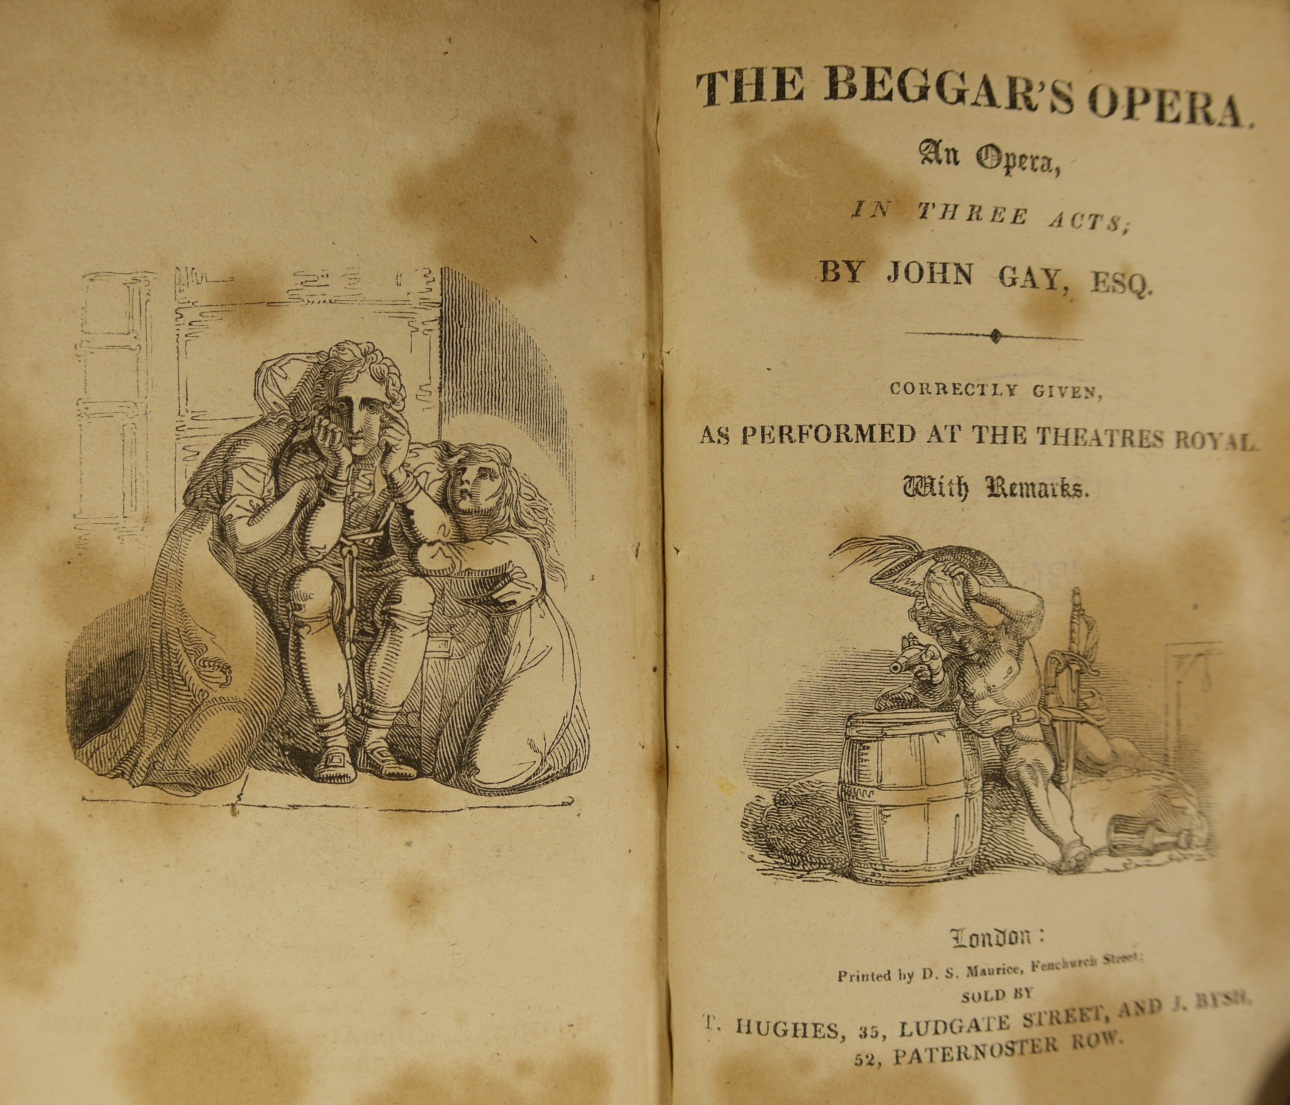 Cover page for the libretto of The Beggar's Opera